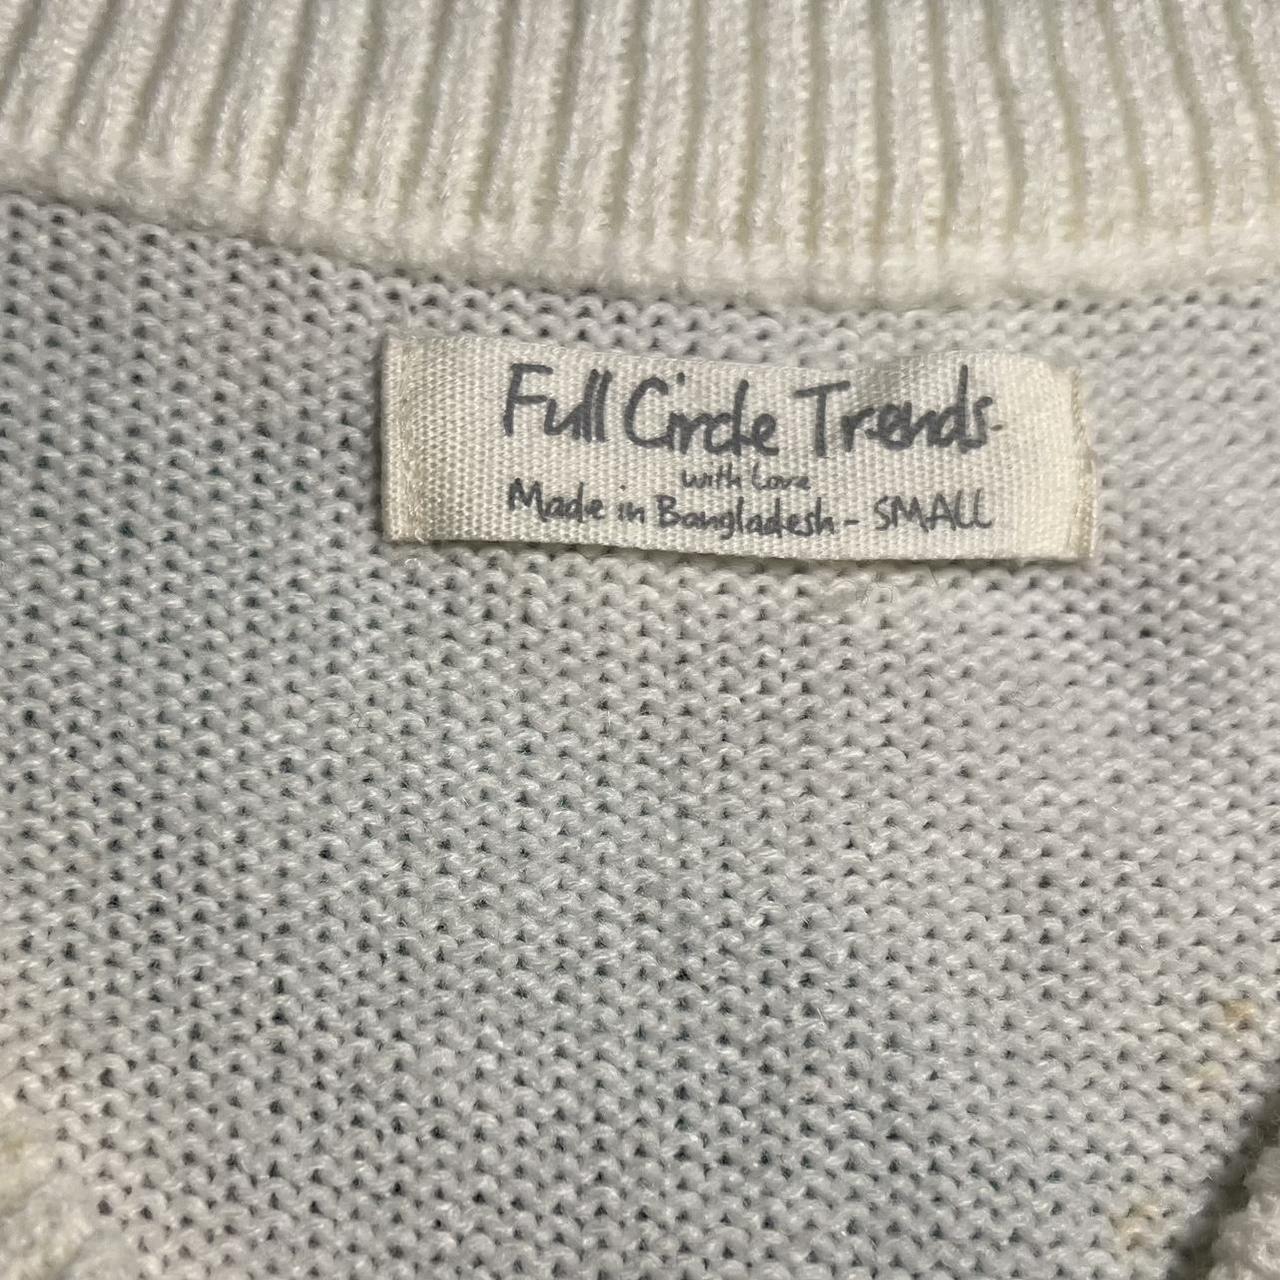 Full Circle Trends Women's White and Pink Jumper (4)